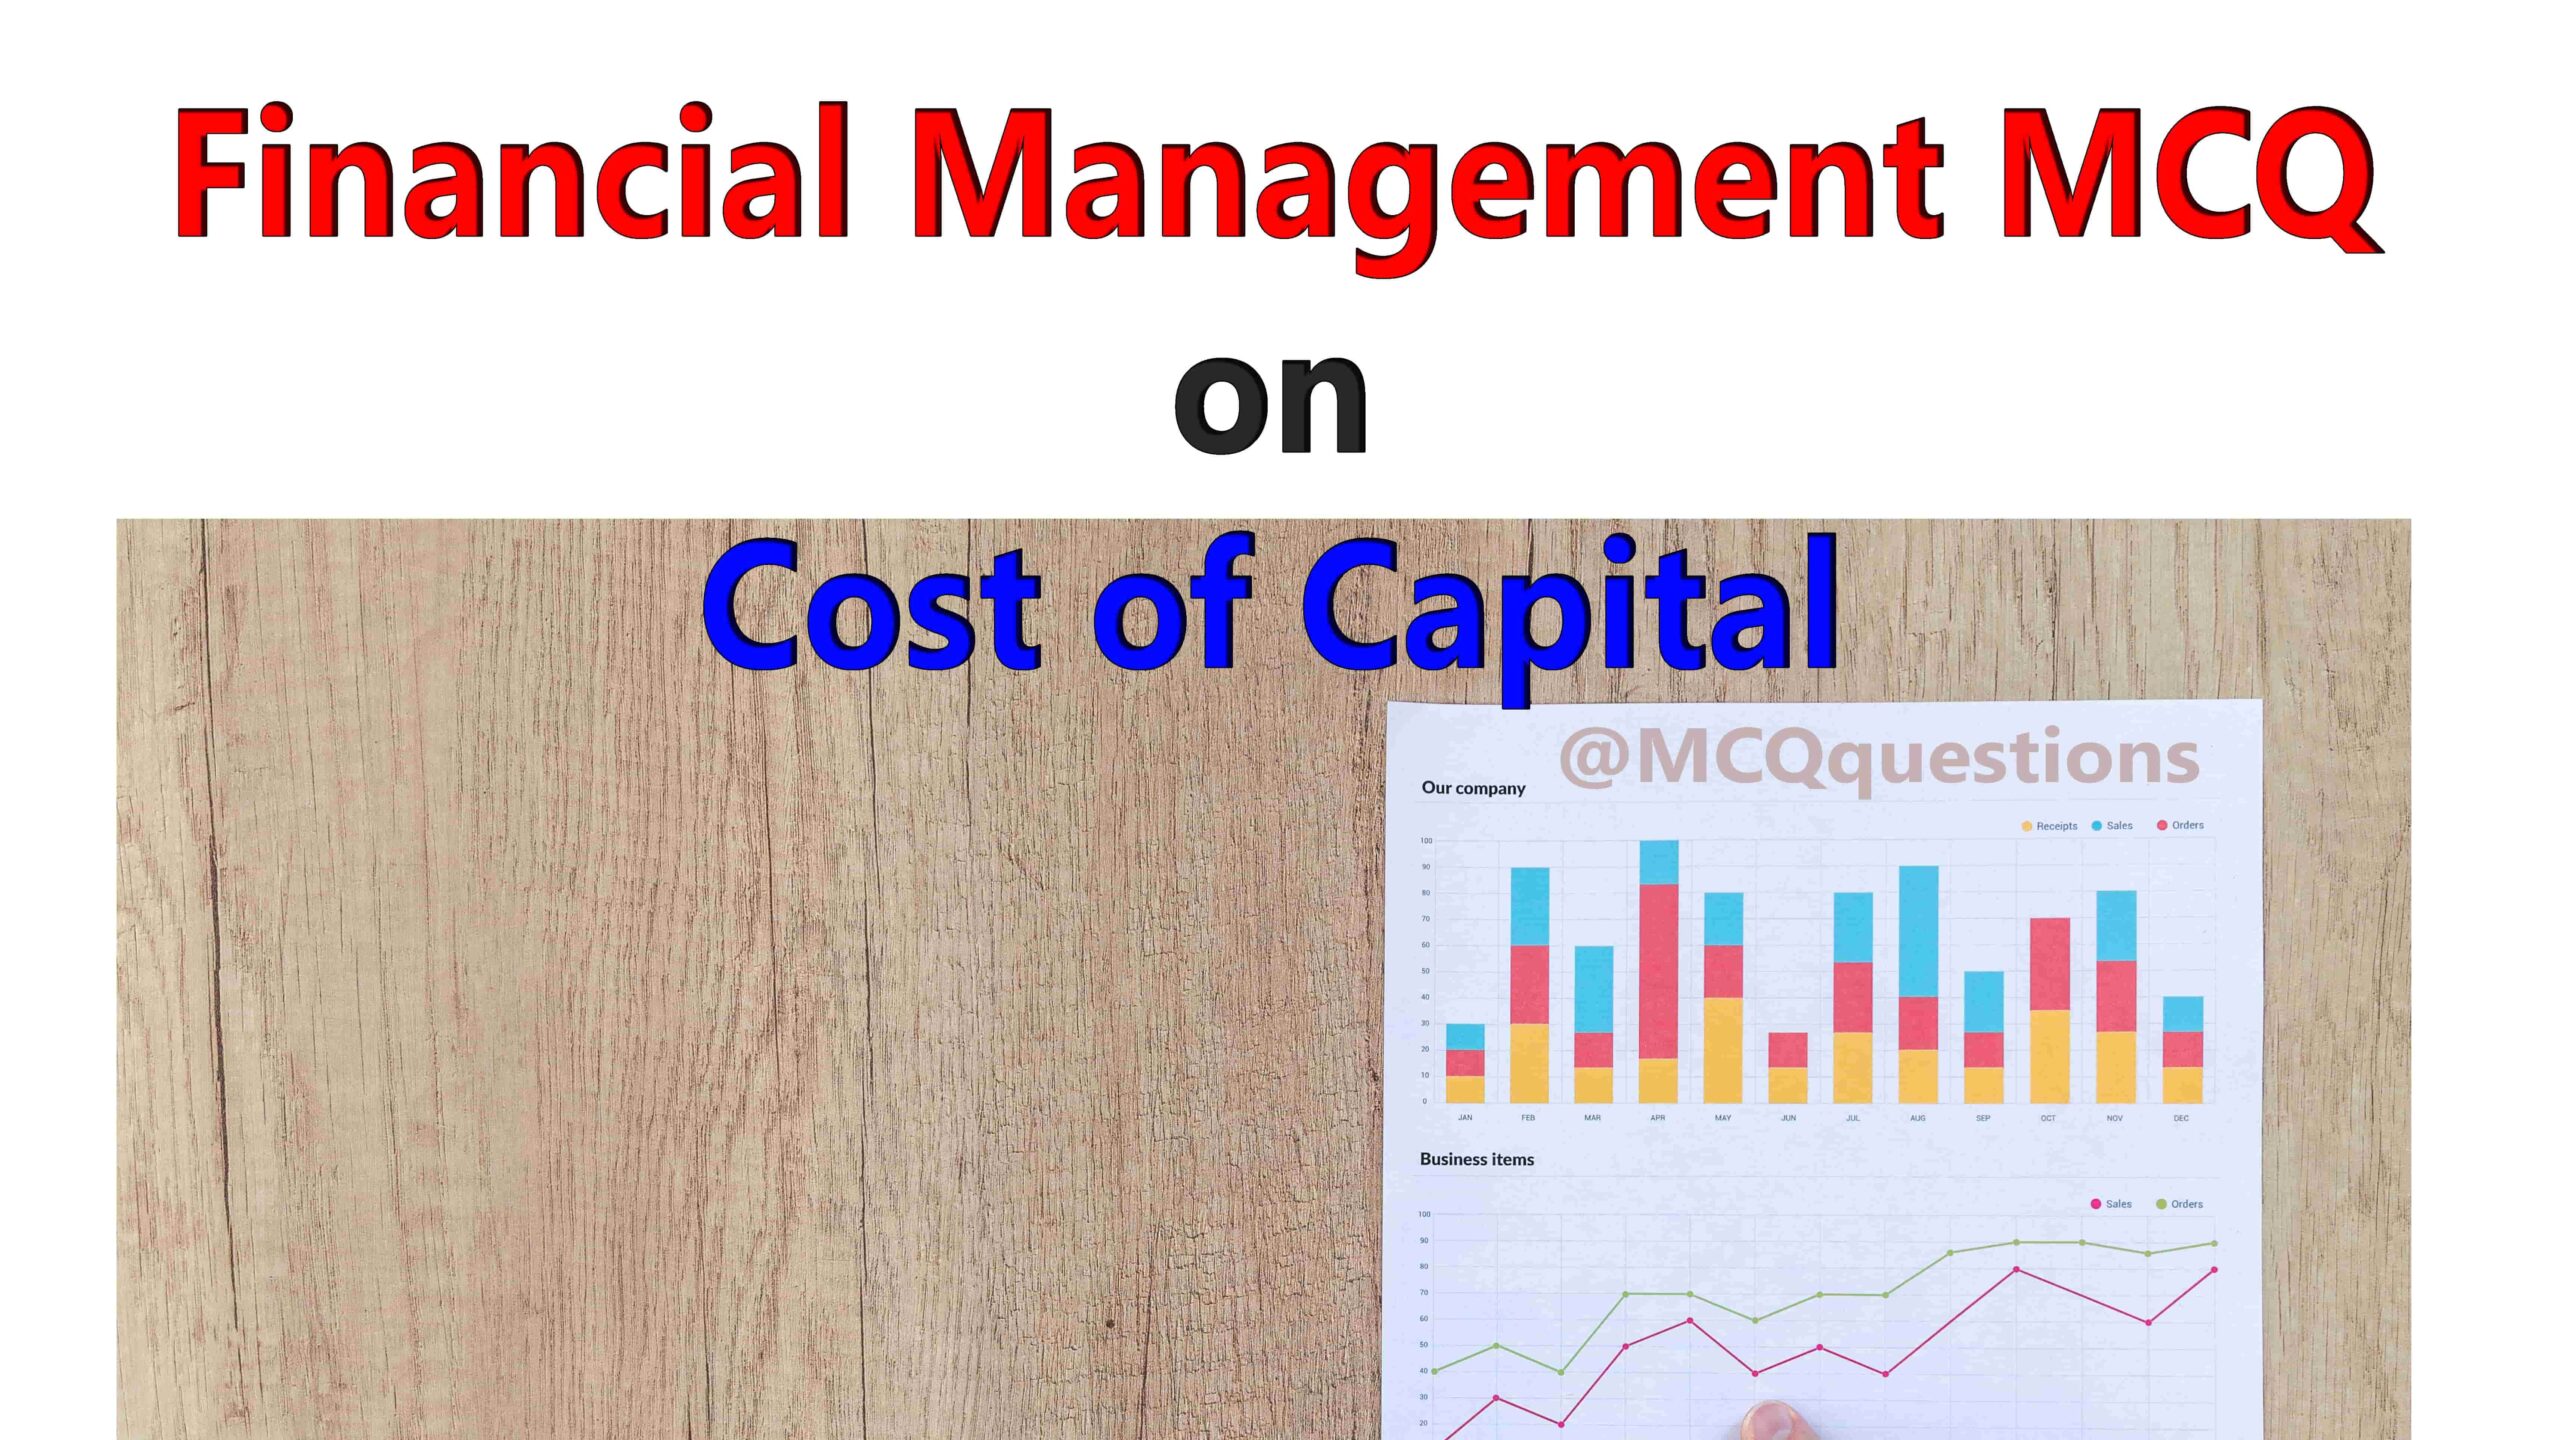 Financial Management MCQ on Cost of Capital